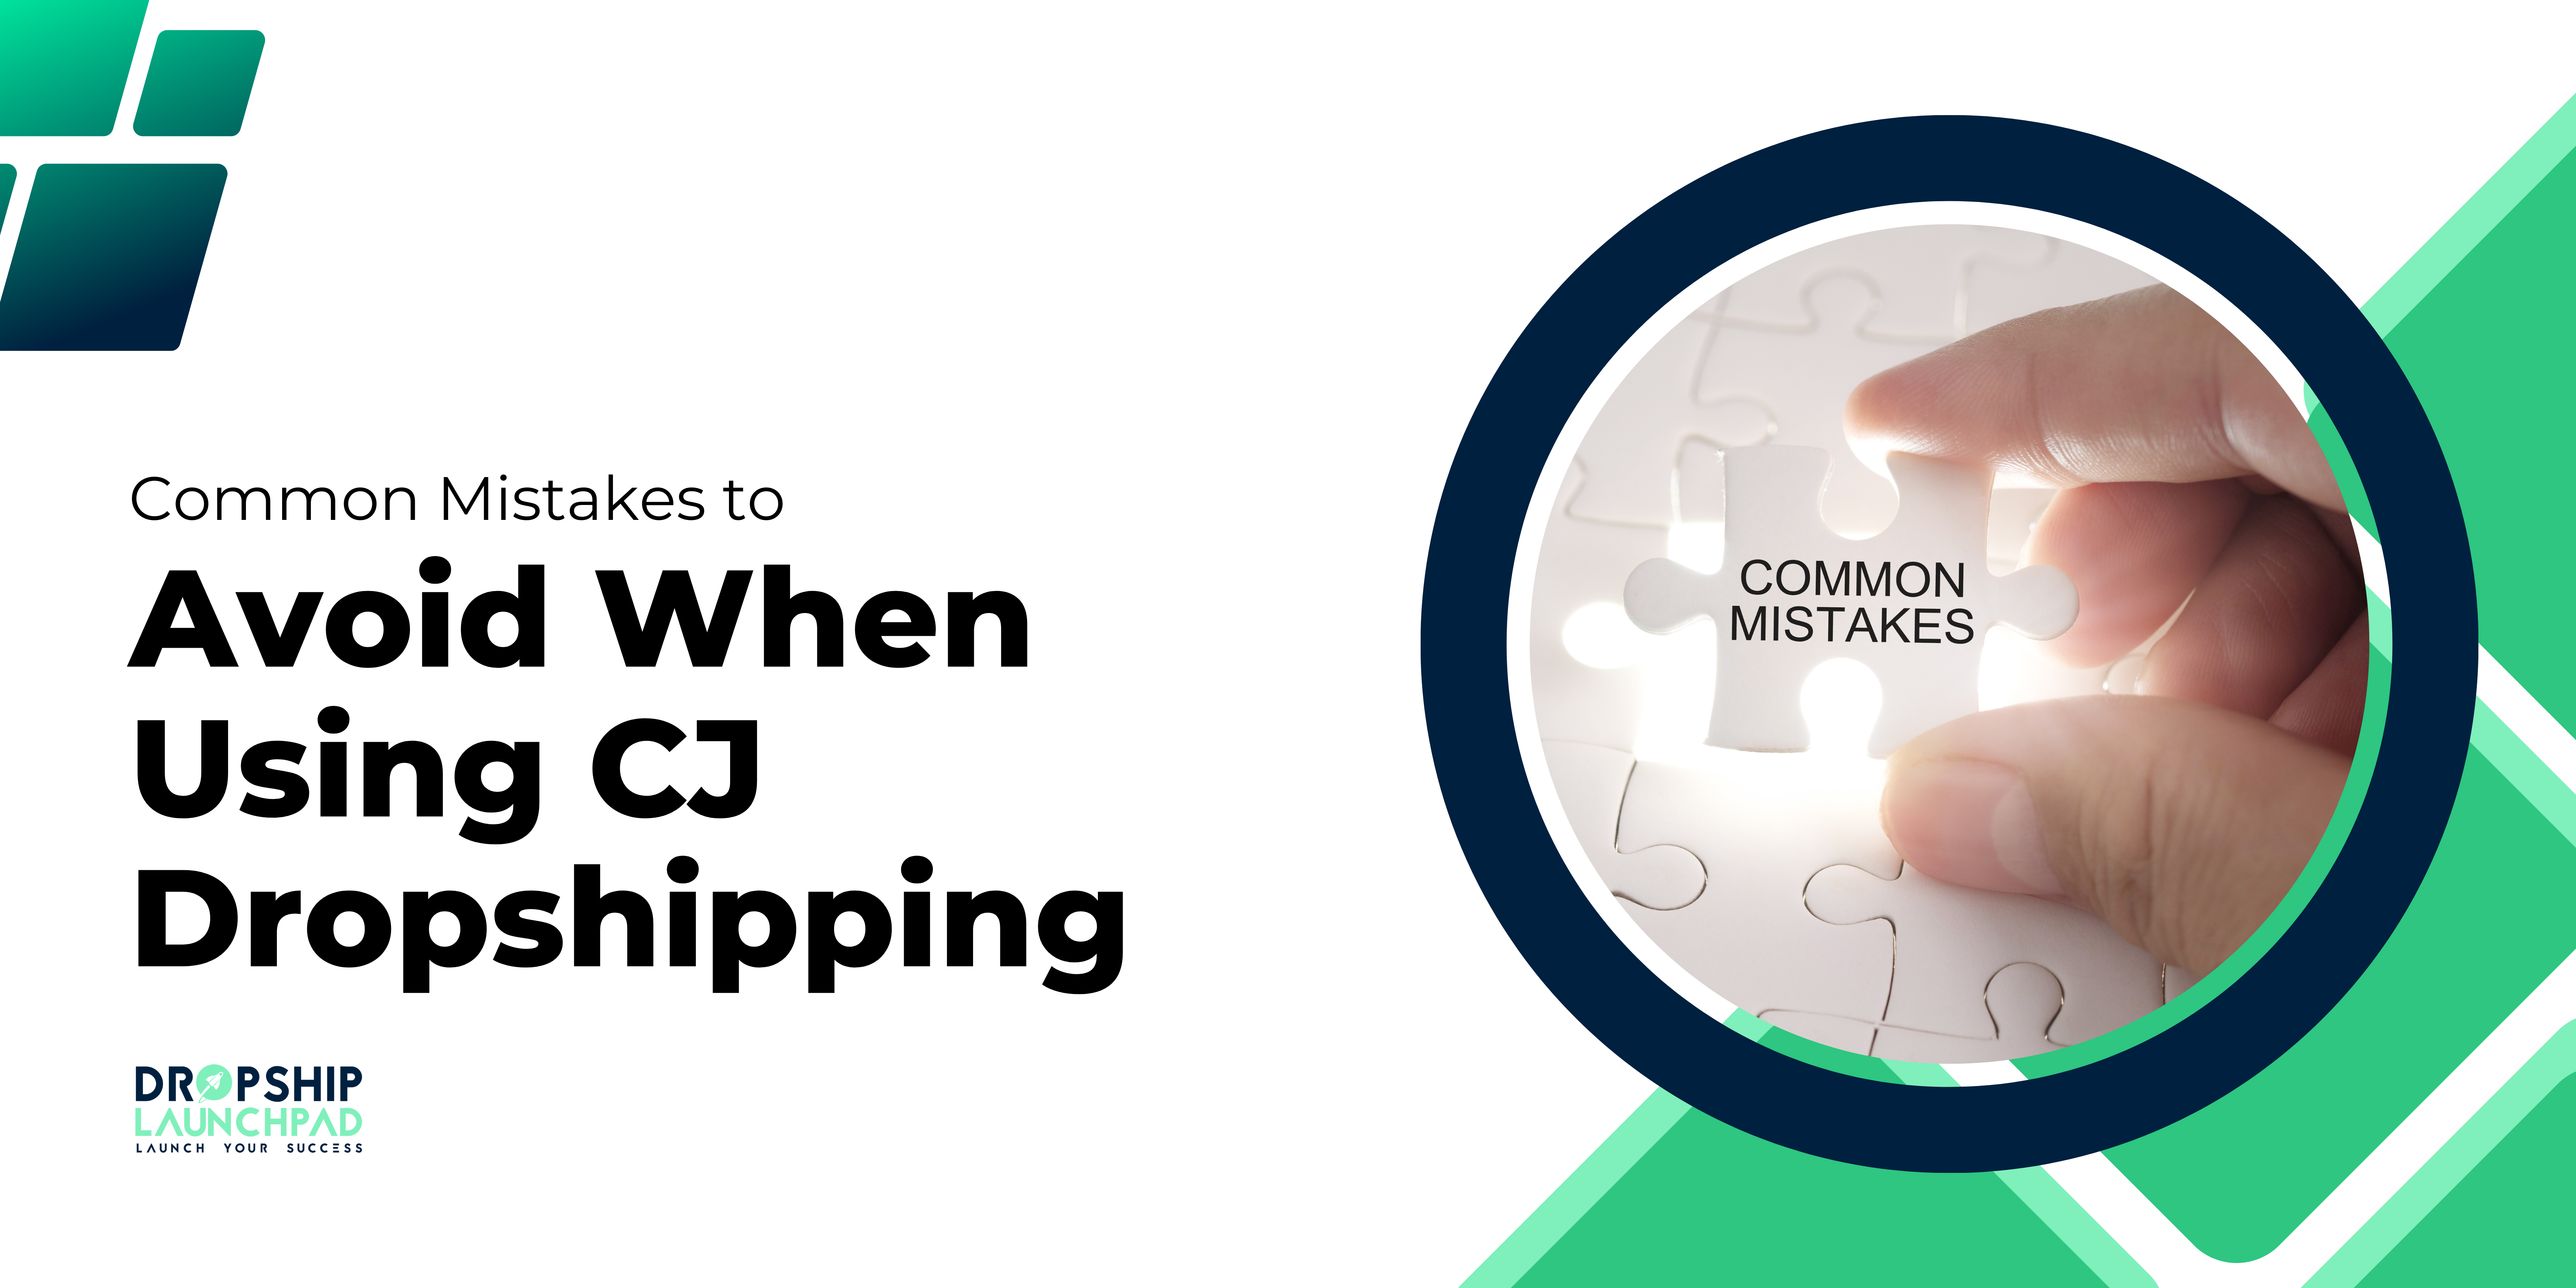 Common Mistakes to Avoid When Using CJ Dropshipping